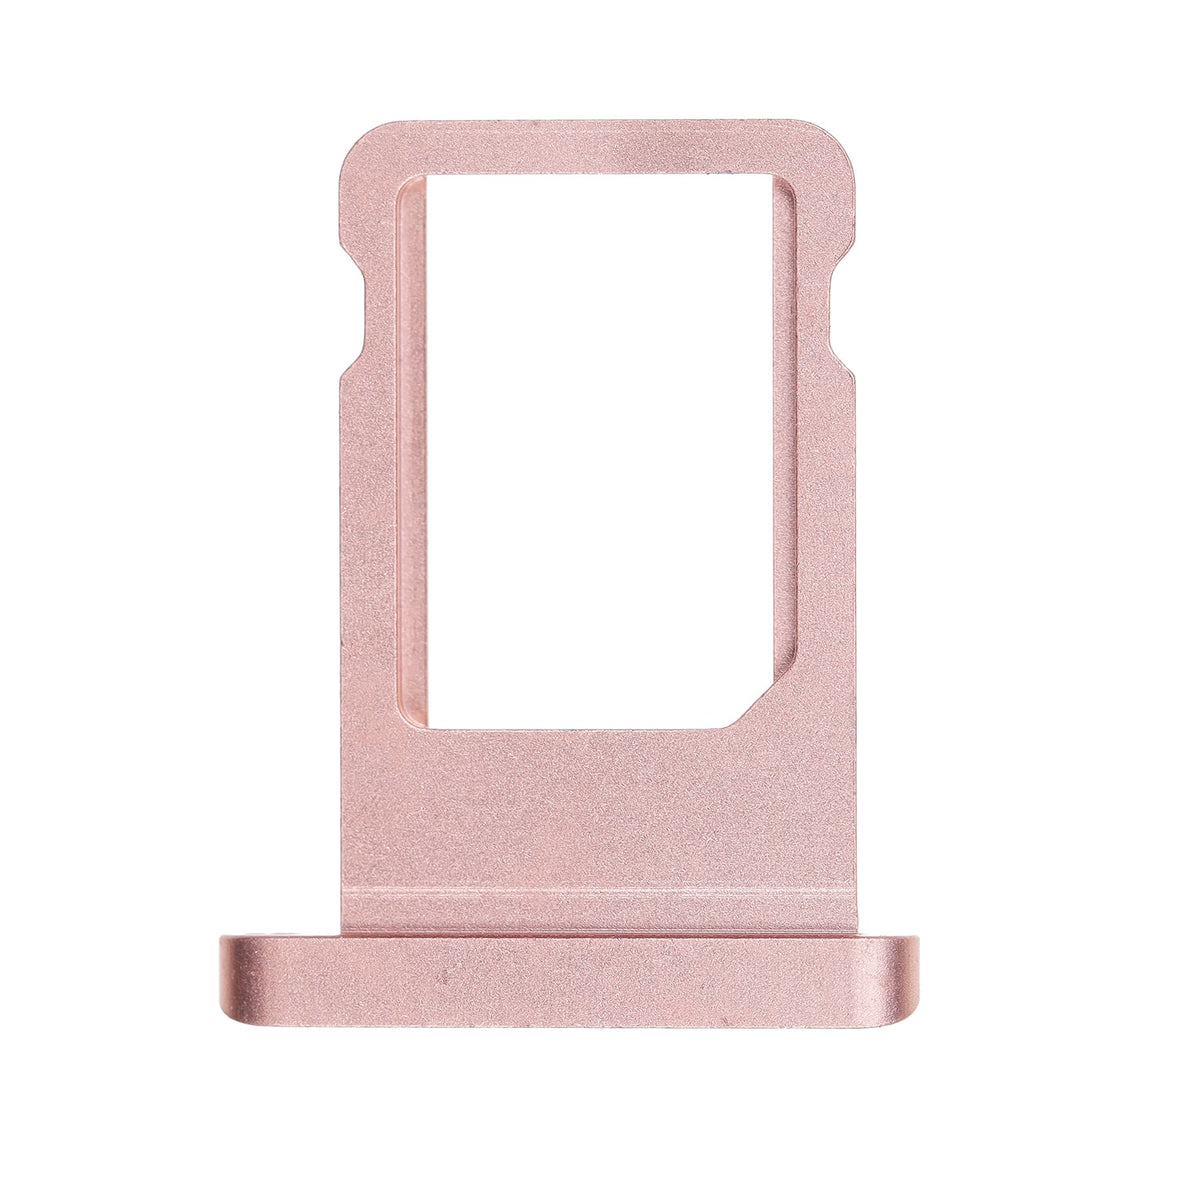 ROSE GOLD SIM CARD TRAY FOR IPAD 7TH